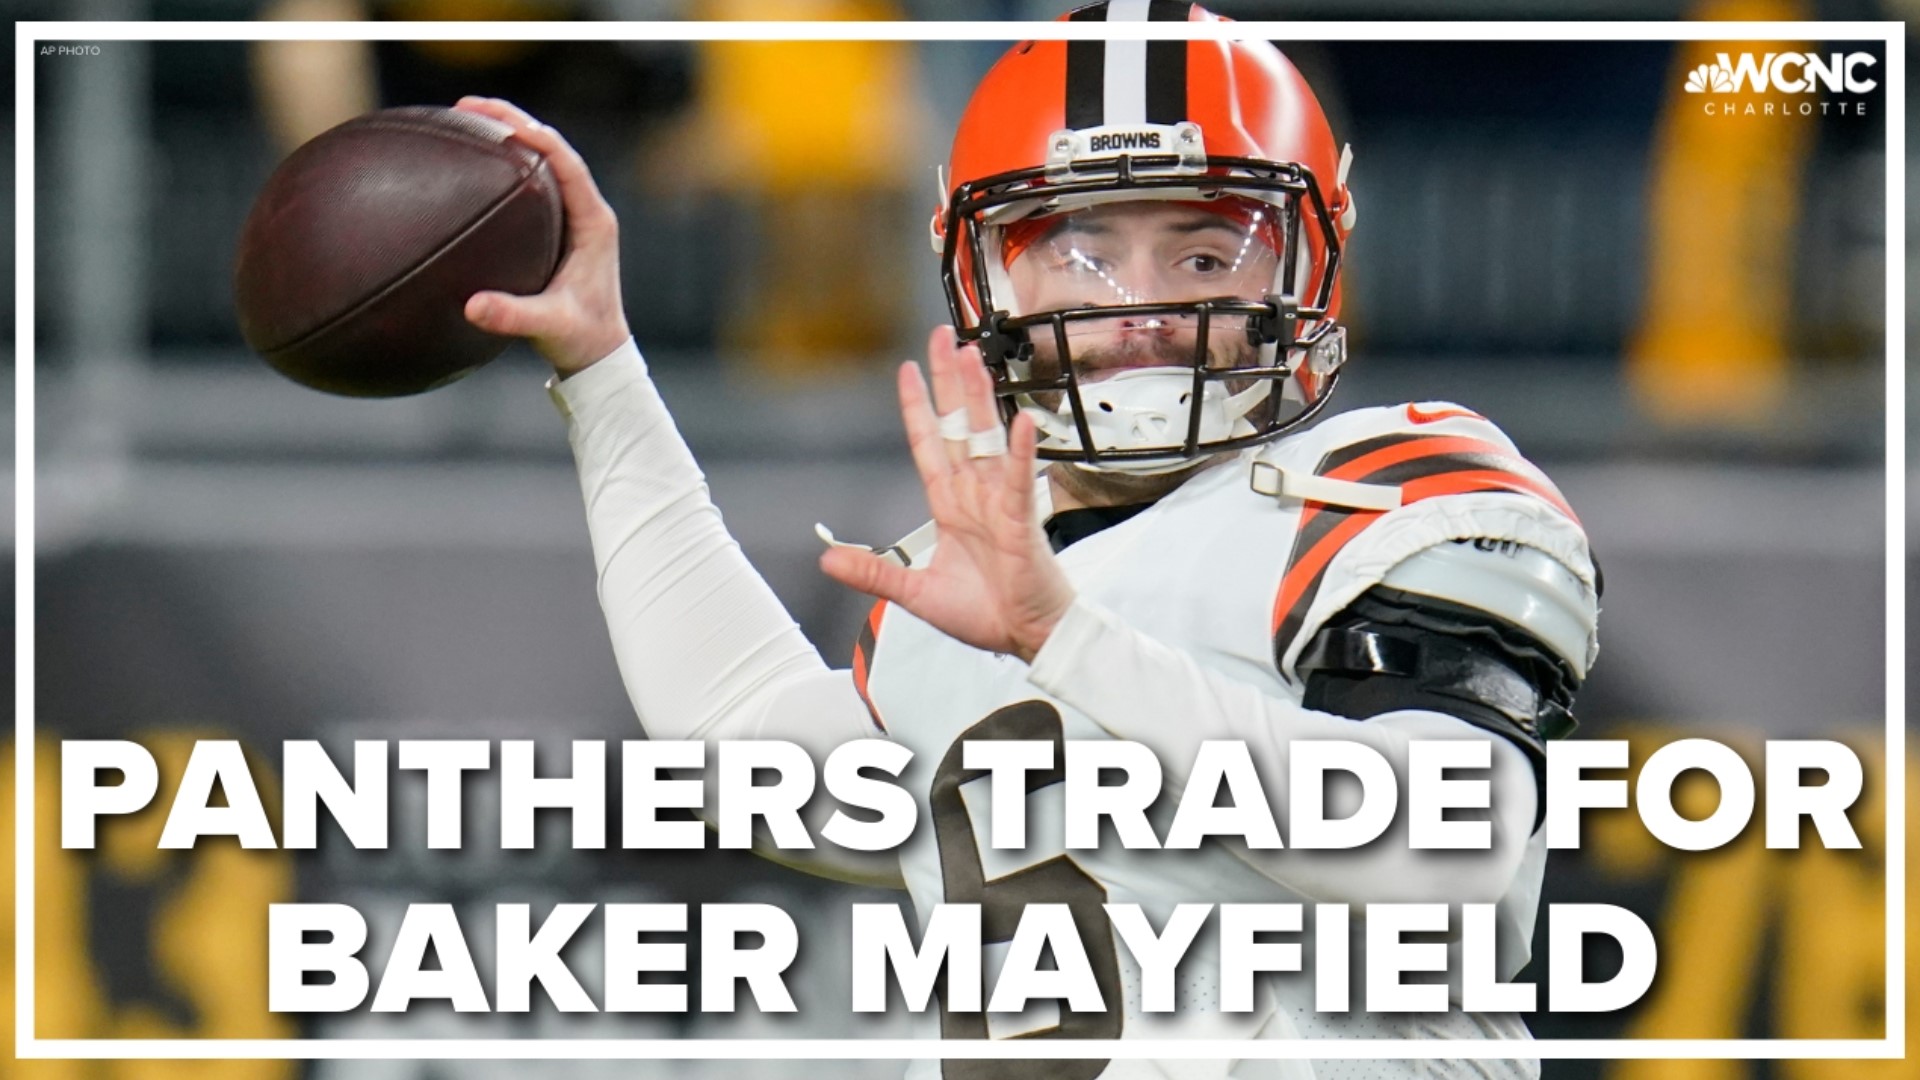 Locked On Panthers host Julian Council joins WCNC Charlotte Sports Director Nick Carboni to discuss Carolina's trade for former Browns QB Baker Mayfield.